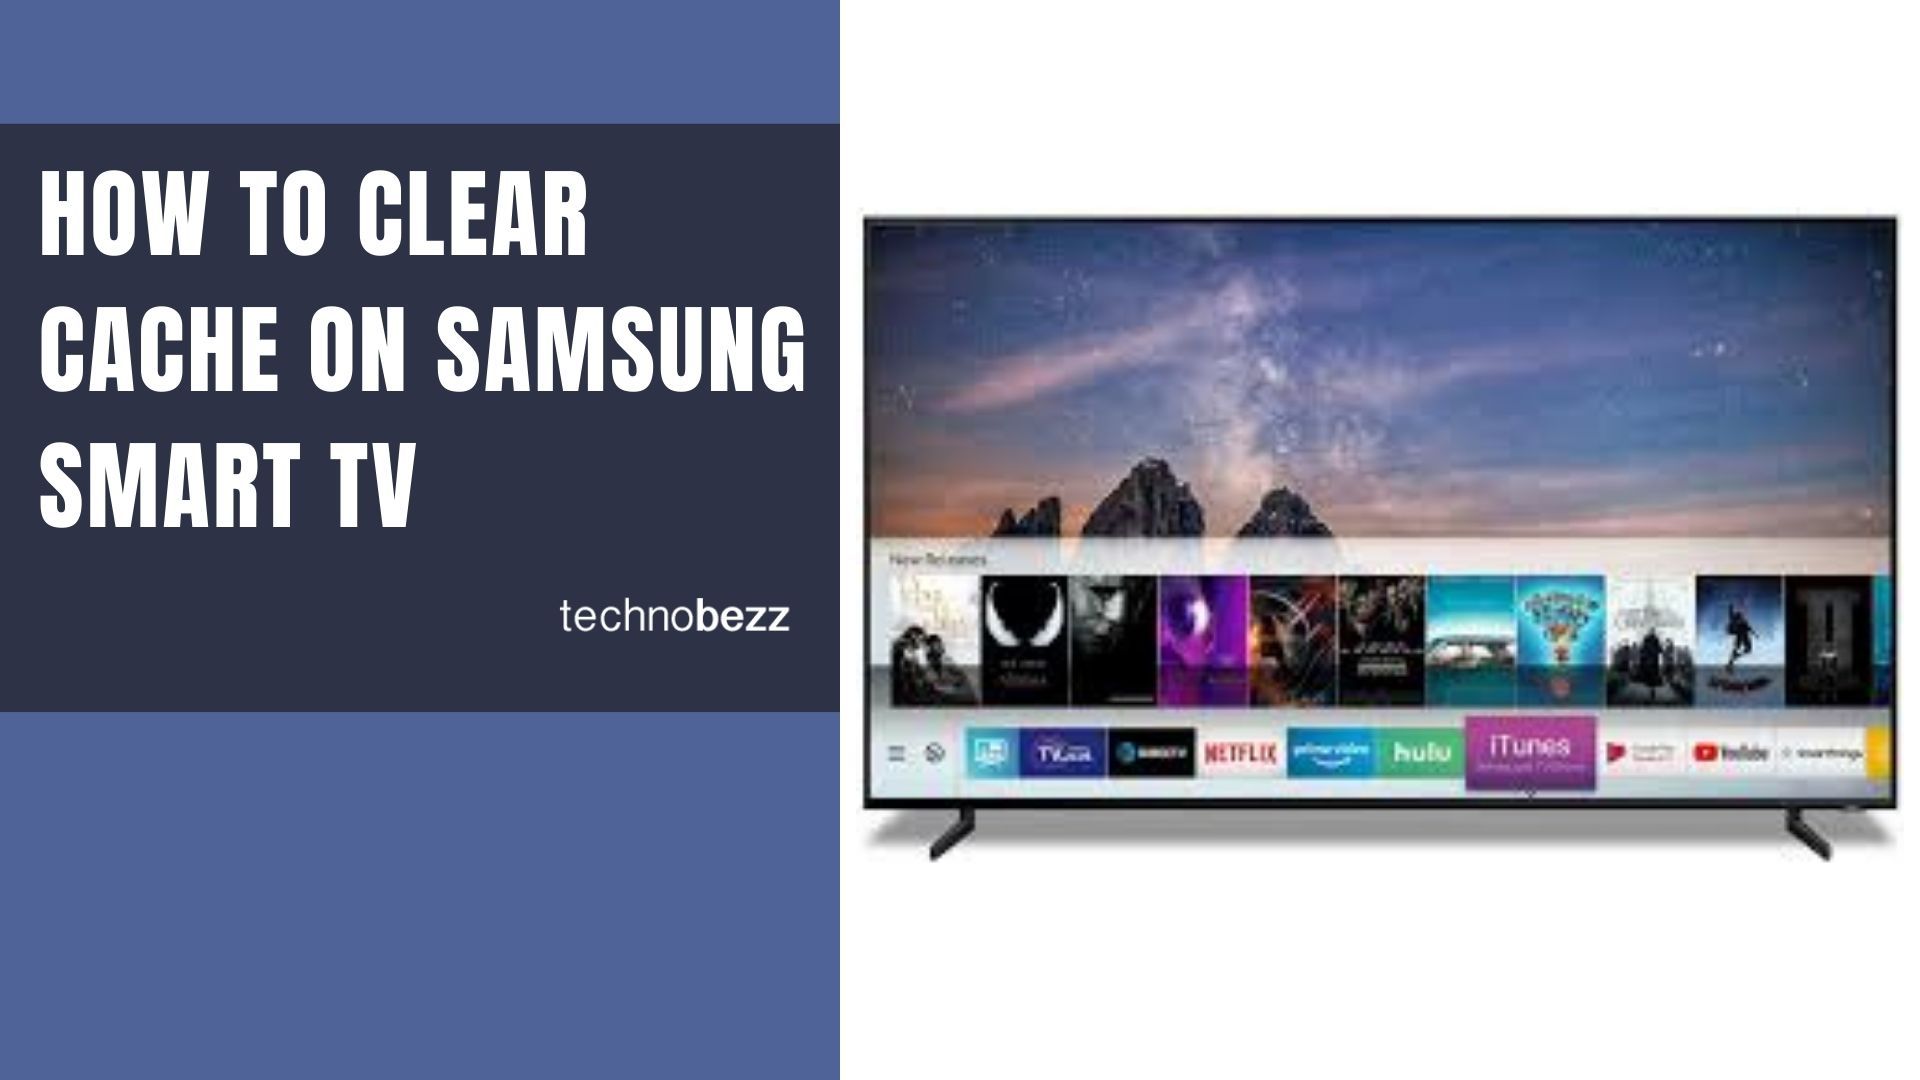 How To Clear Cache And Cookies On A Smart TV - Technobezz